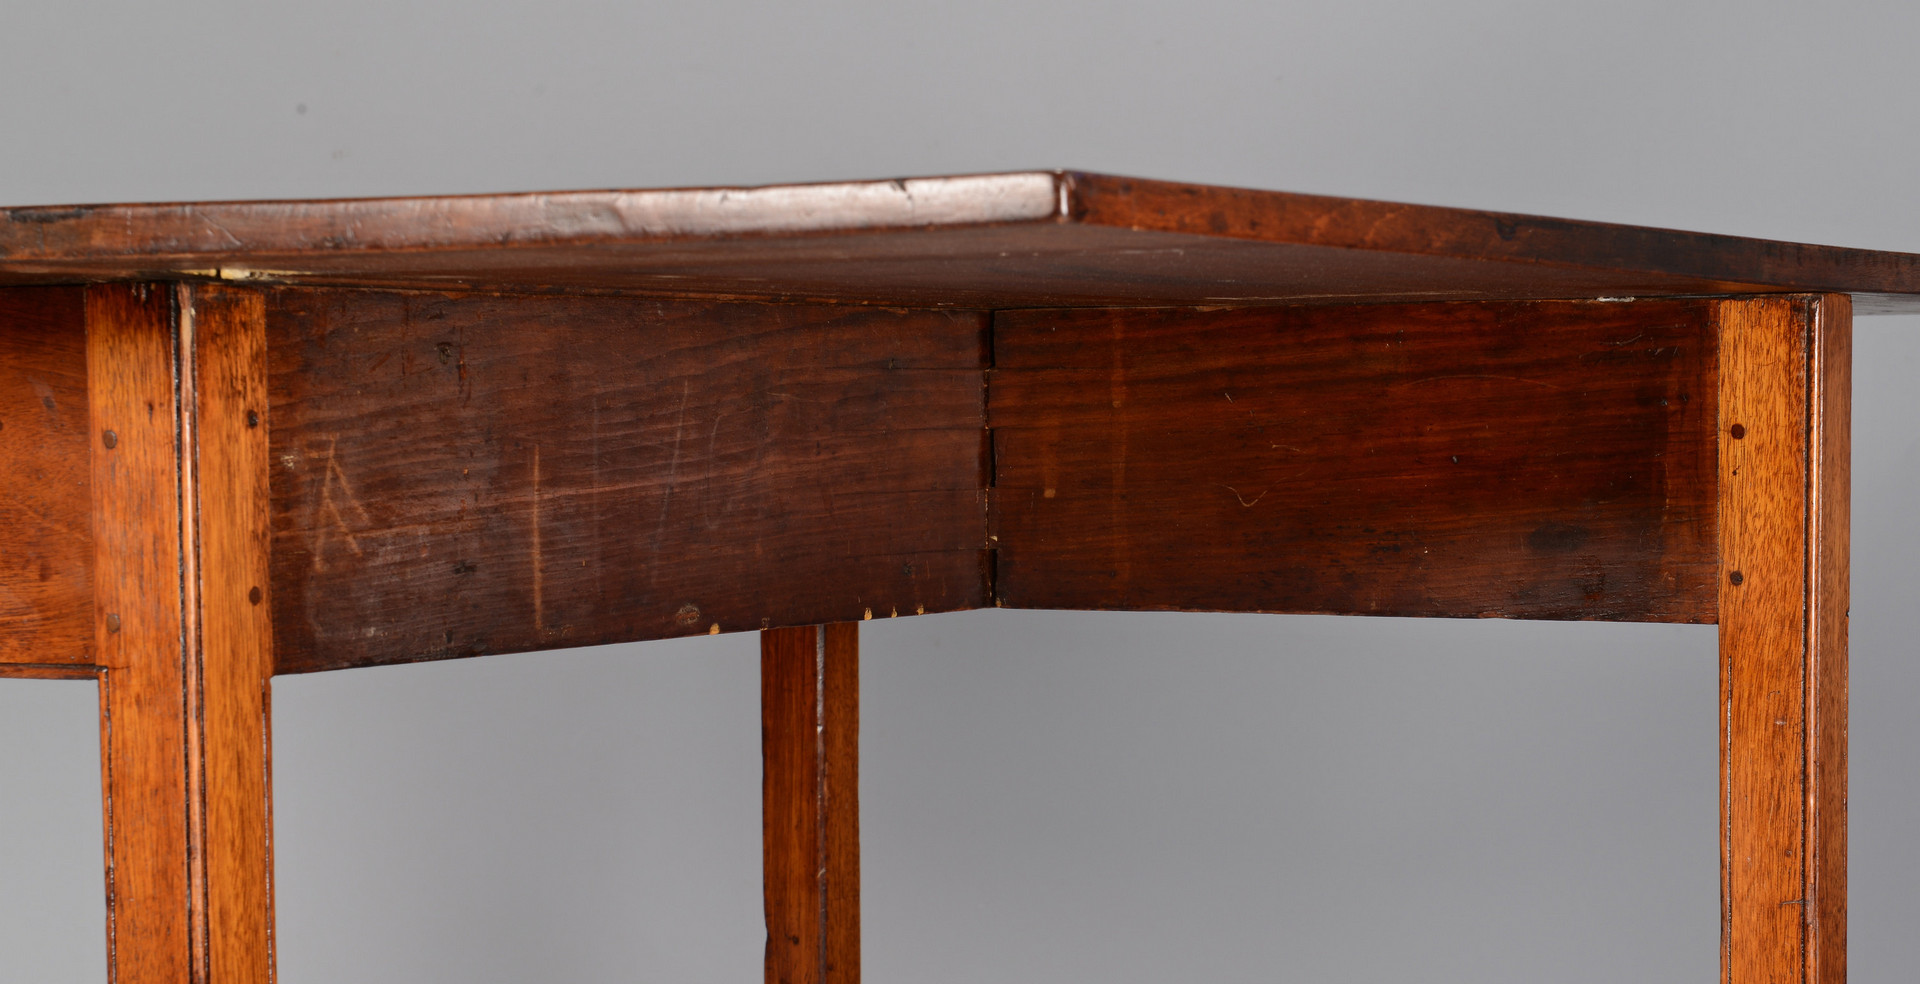 Lot 286: Chippendale Drop Leaf Table, circa 1800